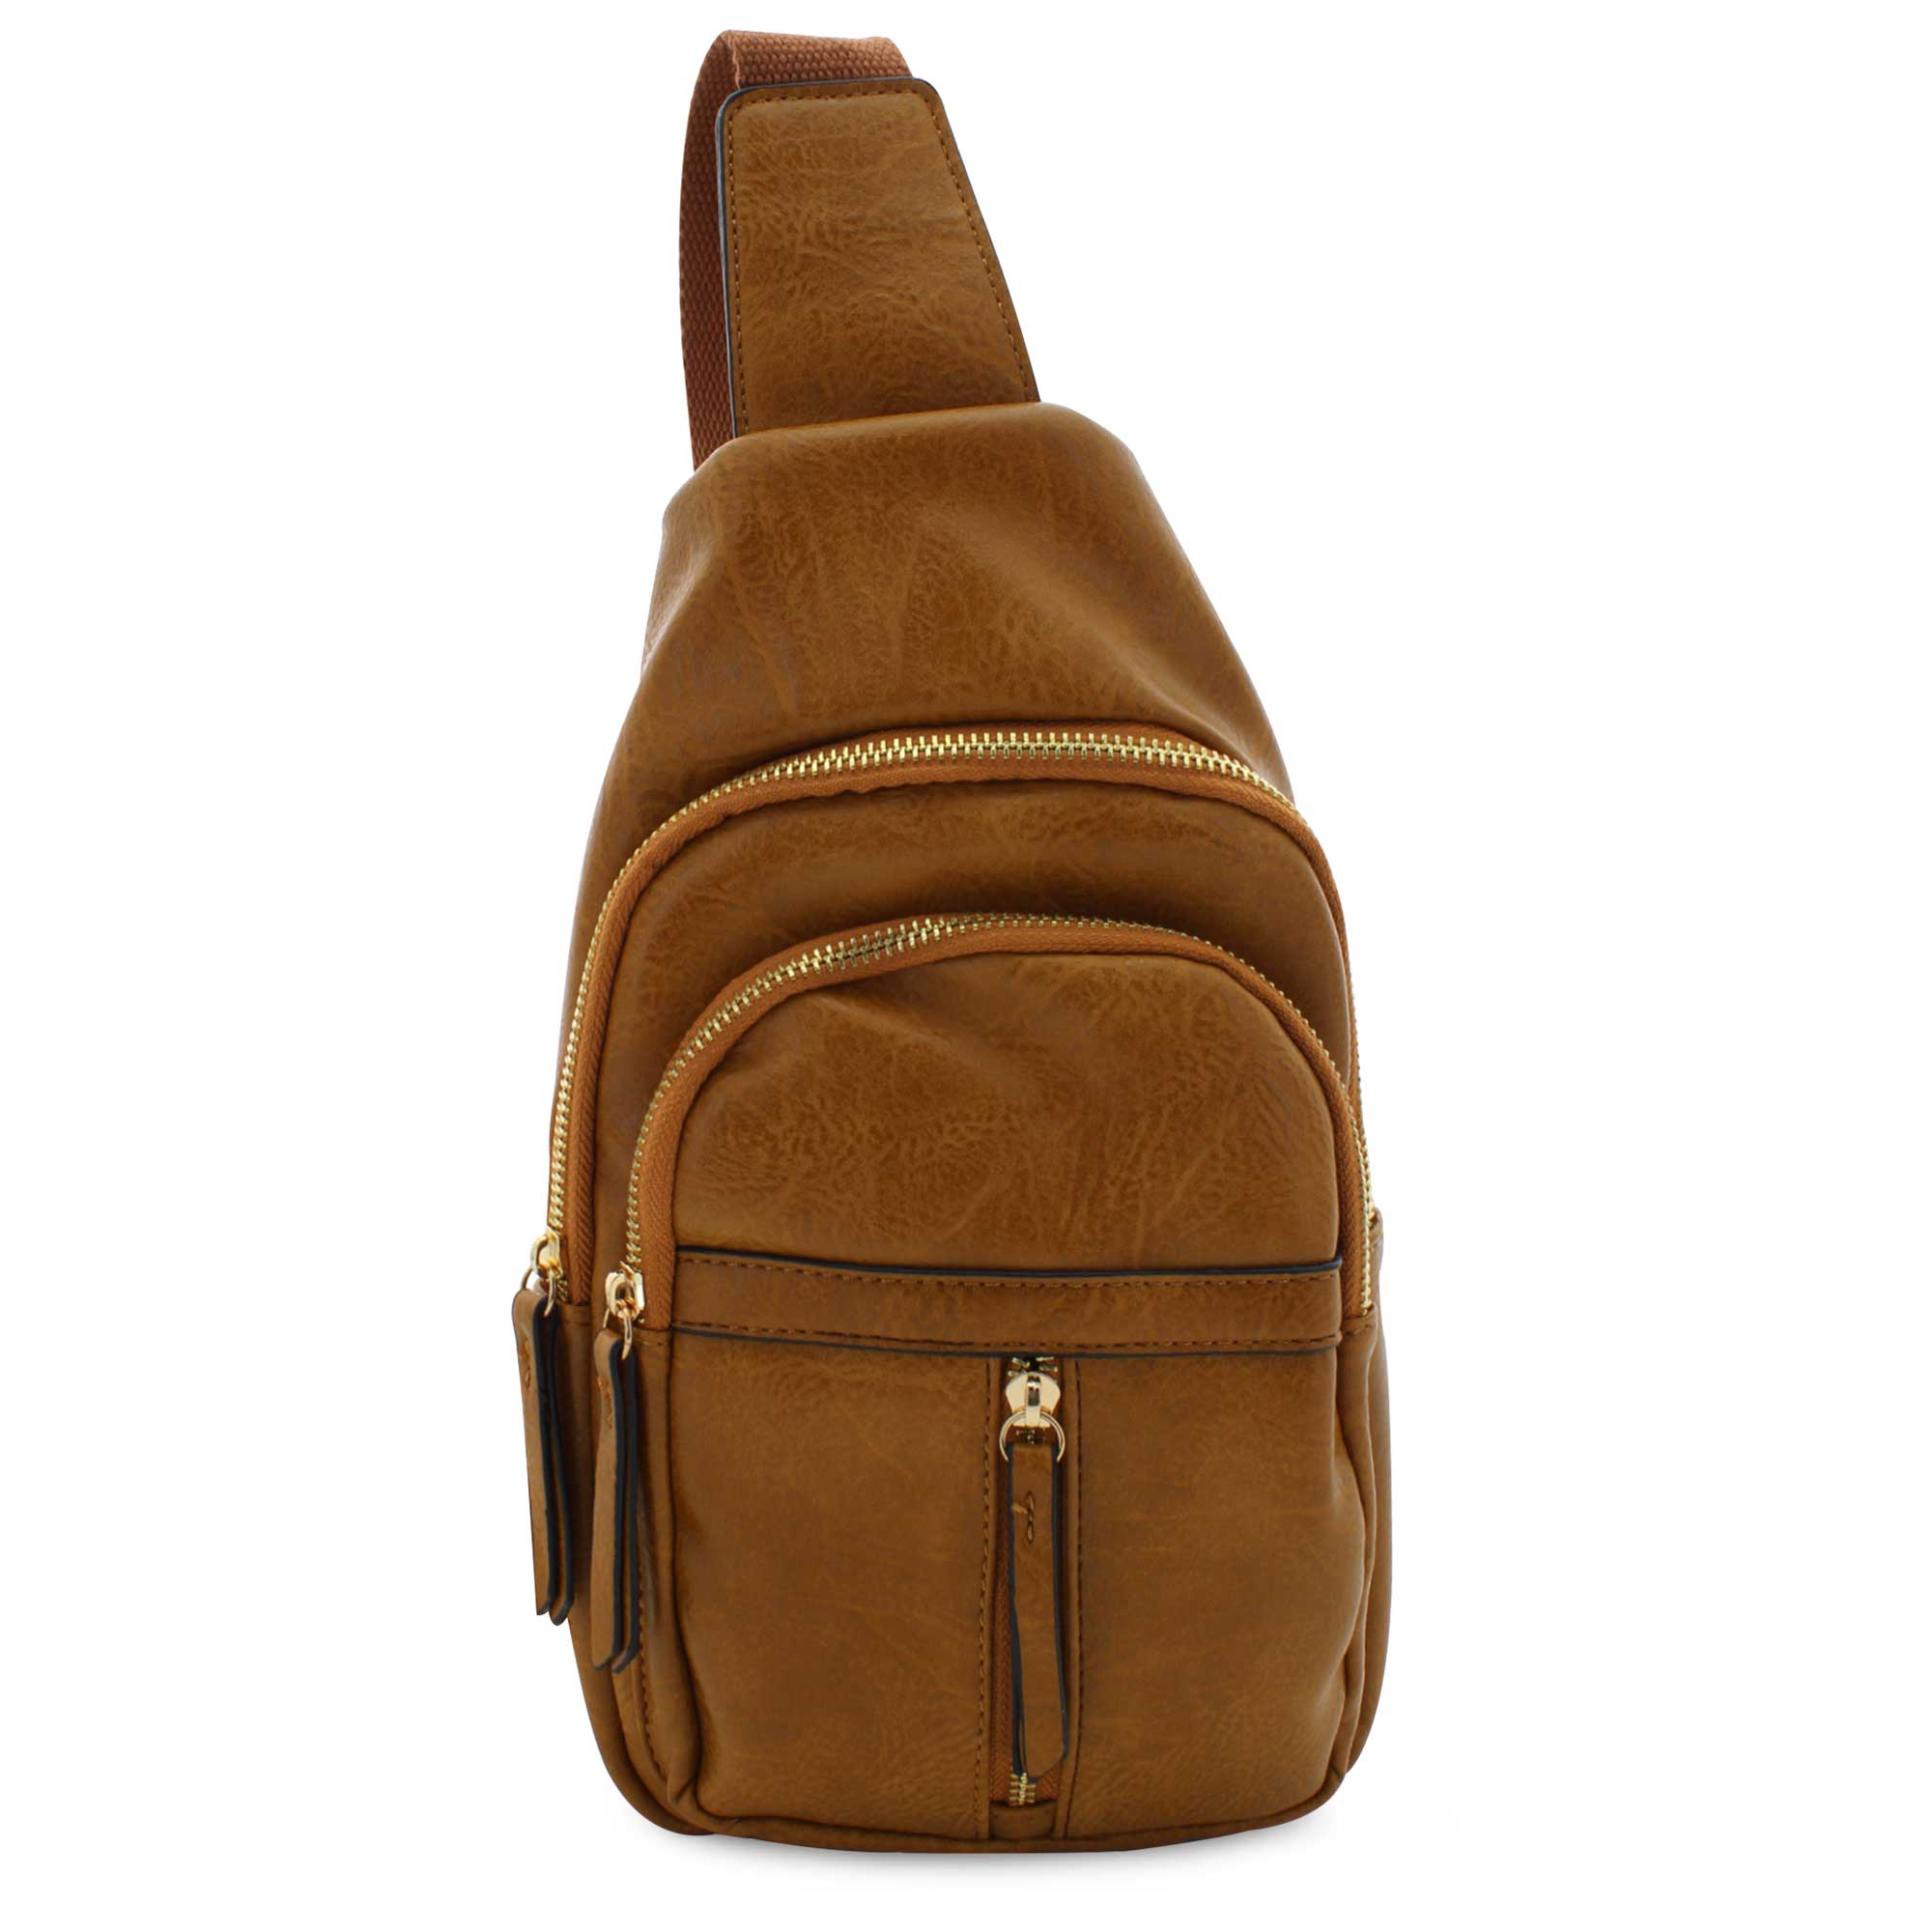 Backpacks, Gym Sacks and Totes | Accessories at SHOE DEPT. ENCORE